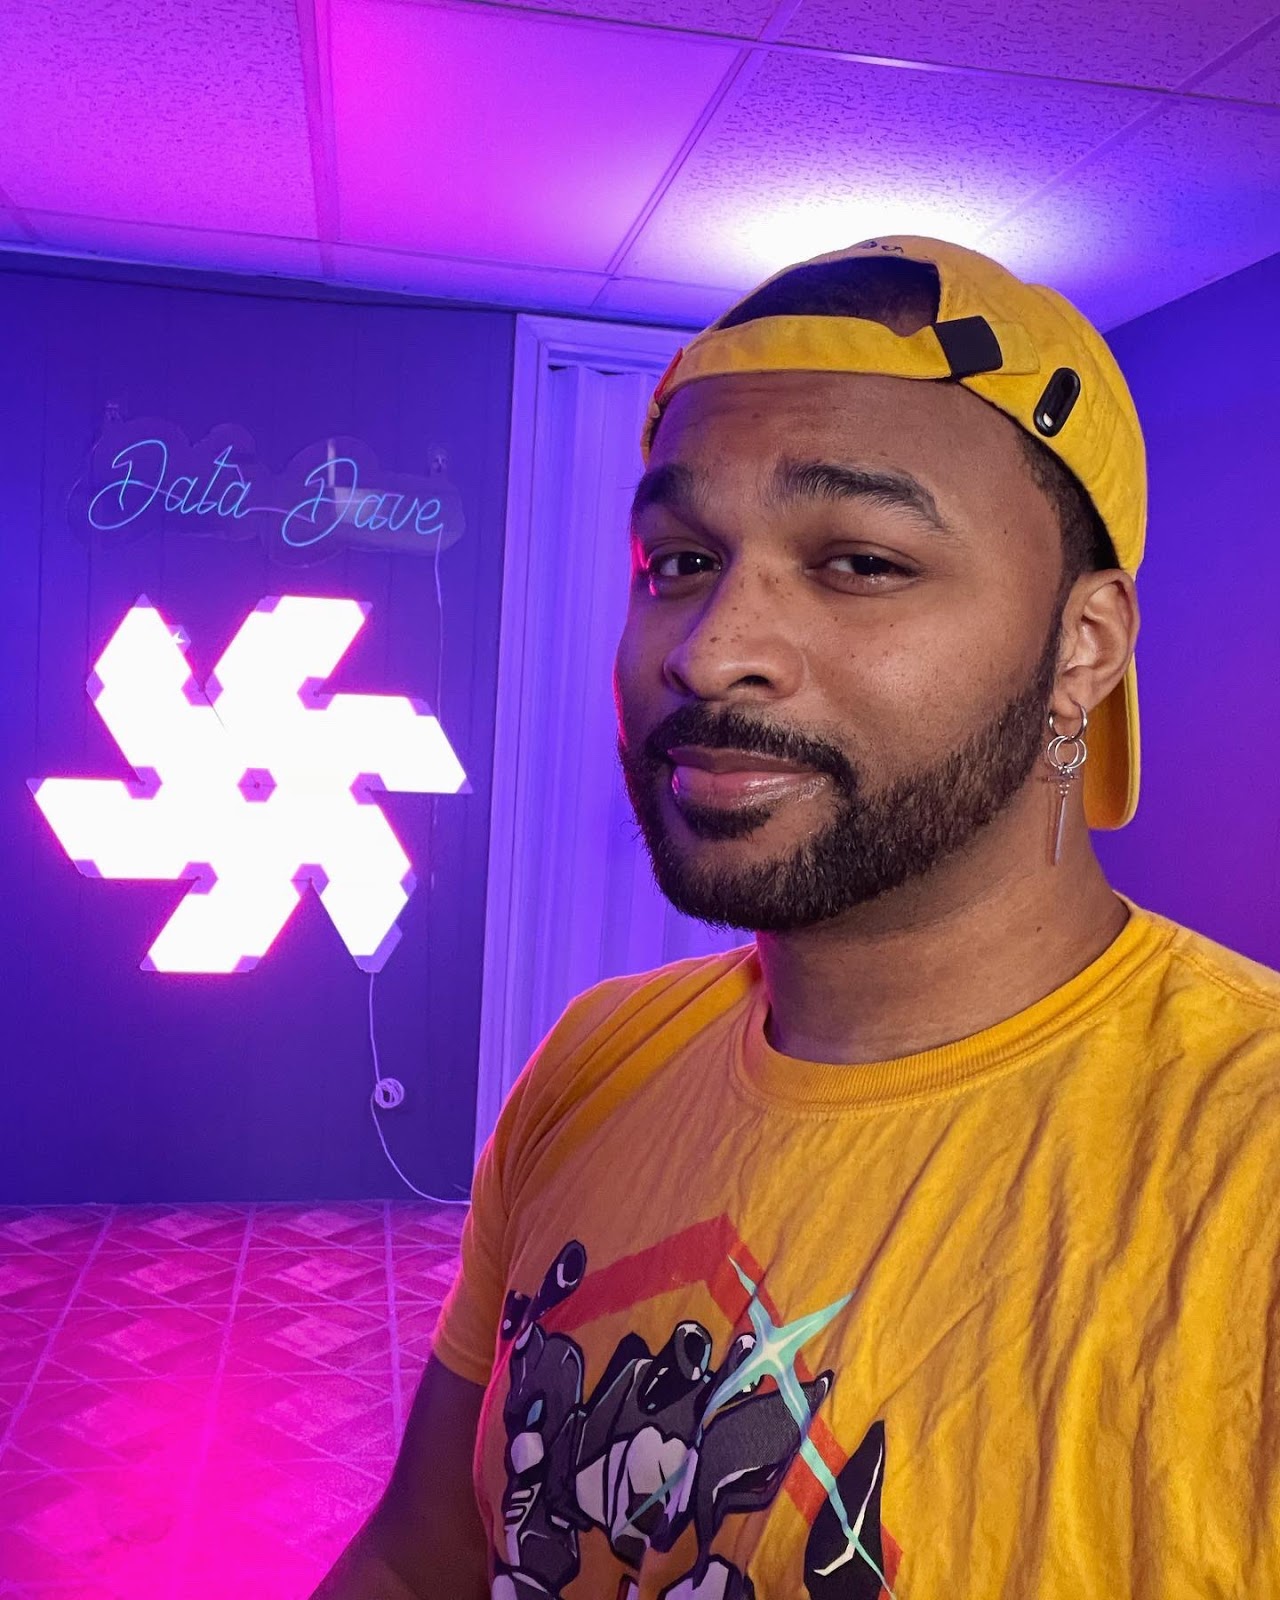 DataDave, a Black man in his 20'-30's wearing a yellow shirt and yellow backwards ball cap. The room behind him is glowing with purple light